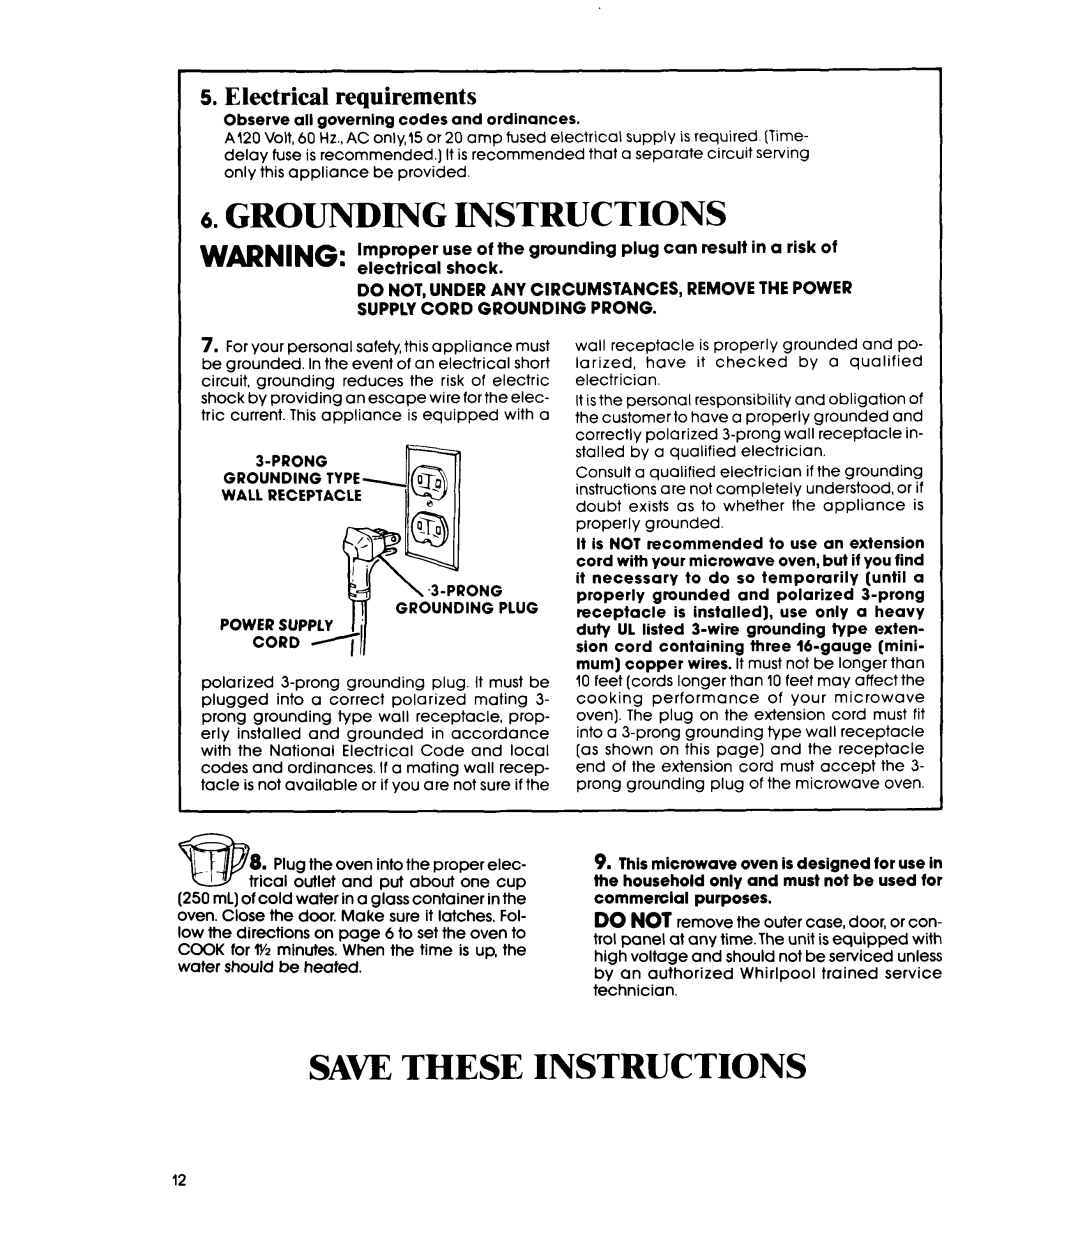 Whirlpool Microwace Oven manual Grounding Instructions, Electrical requirements, Saw These Instructions 